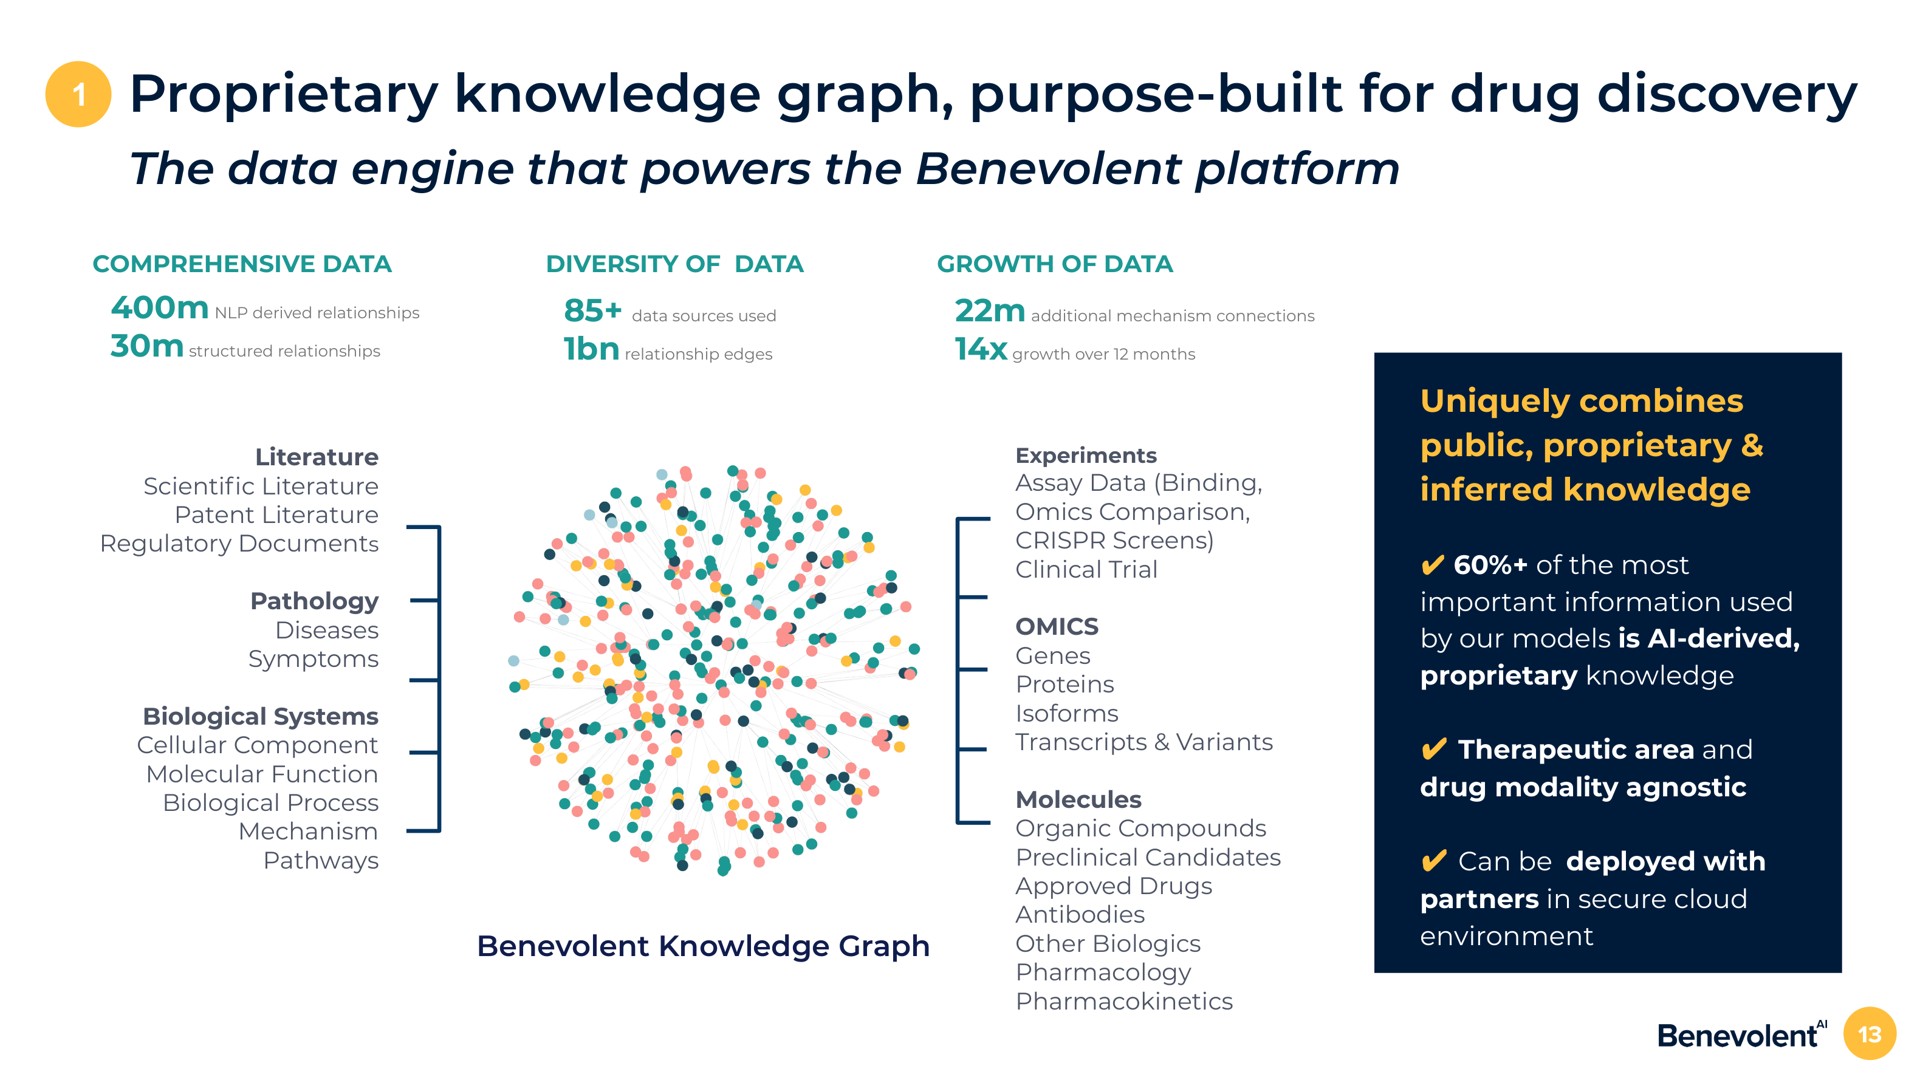 proprietary knowledge graph purpose built for drug discovery the data engine that powers the benevolent platform comprehensive data diversity of data growth of data literature literature patent literature regulatory documents pathology diseases symptoms biological systems cellular component molecular function biological process mechanism pathways benevolent knowledge graph assay data binding comparison screens clinical trial genes proteins transcripts variants molecules organic compounds preclinical candidates approved drugs antibodies other pharmacology uniquely combines public proprietary inferred knowledge of the most important information used by our models is derived proprietary knowledge therapeutic area and drug modality agnostic can be deployed with partners in secure cloud environment | BenevolentAI